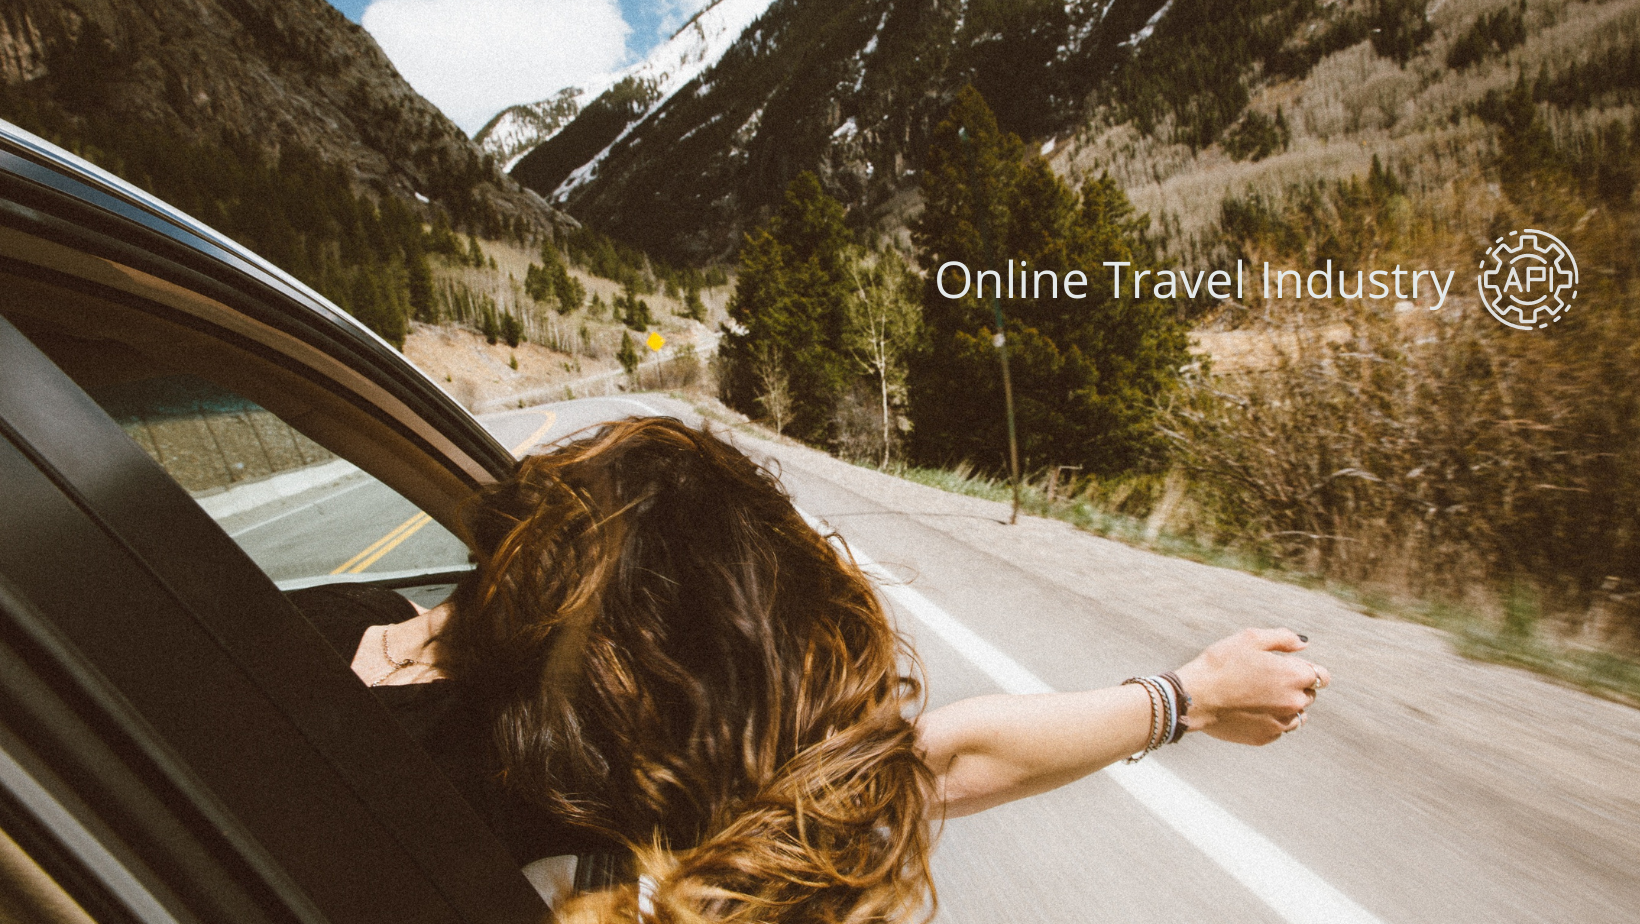 The Importance of APIs in the Online Travel Industry